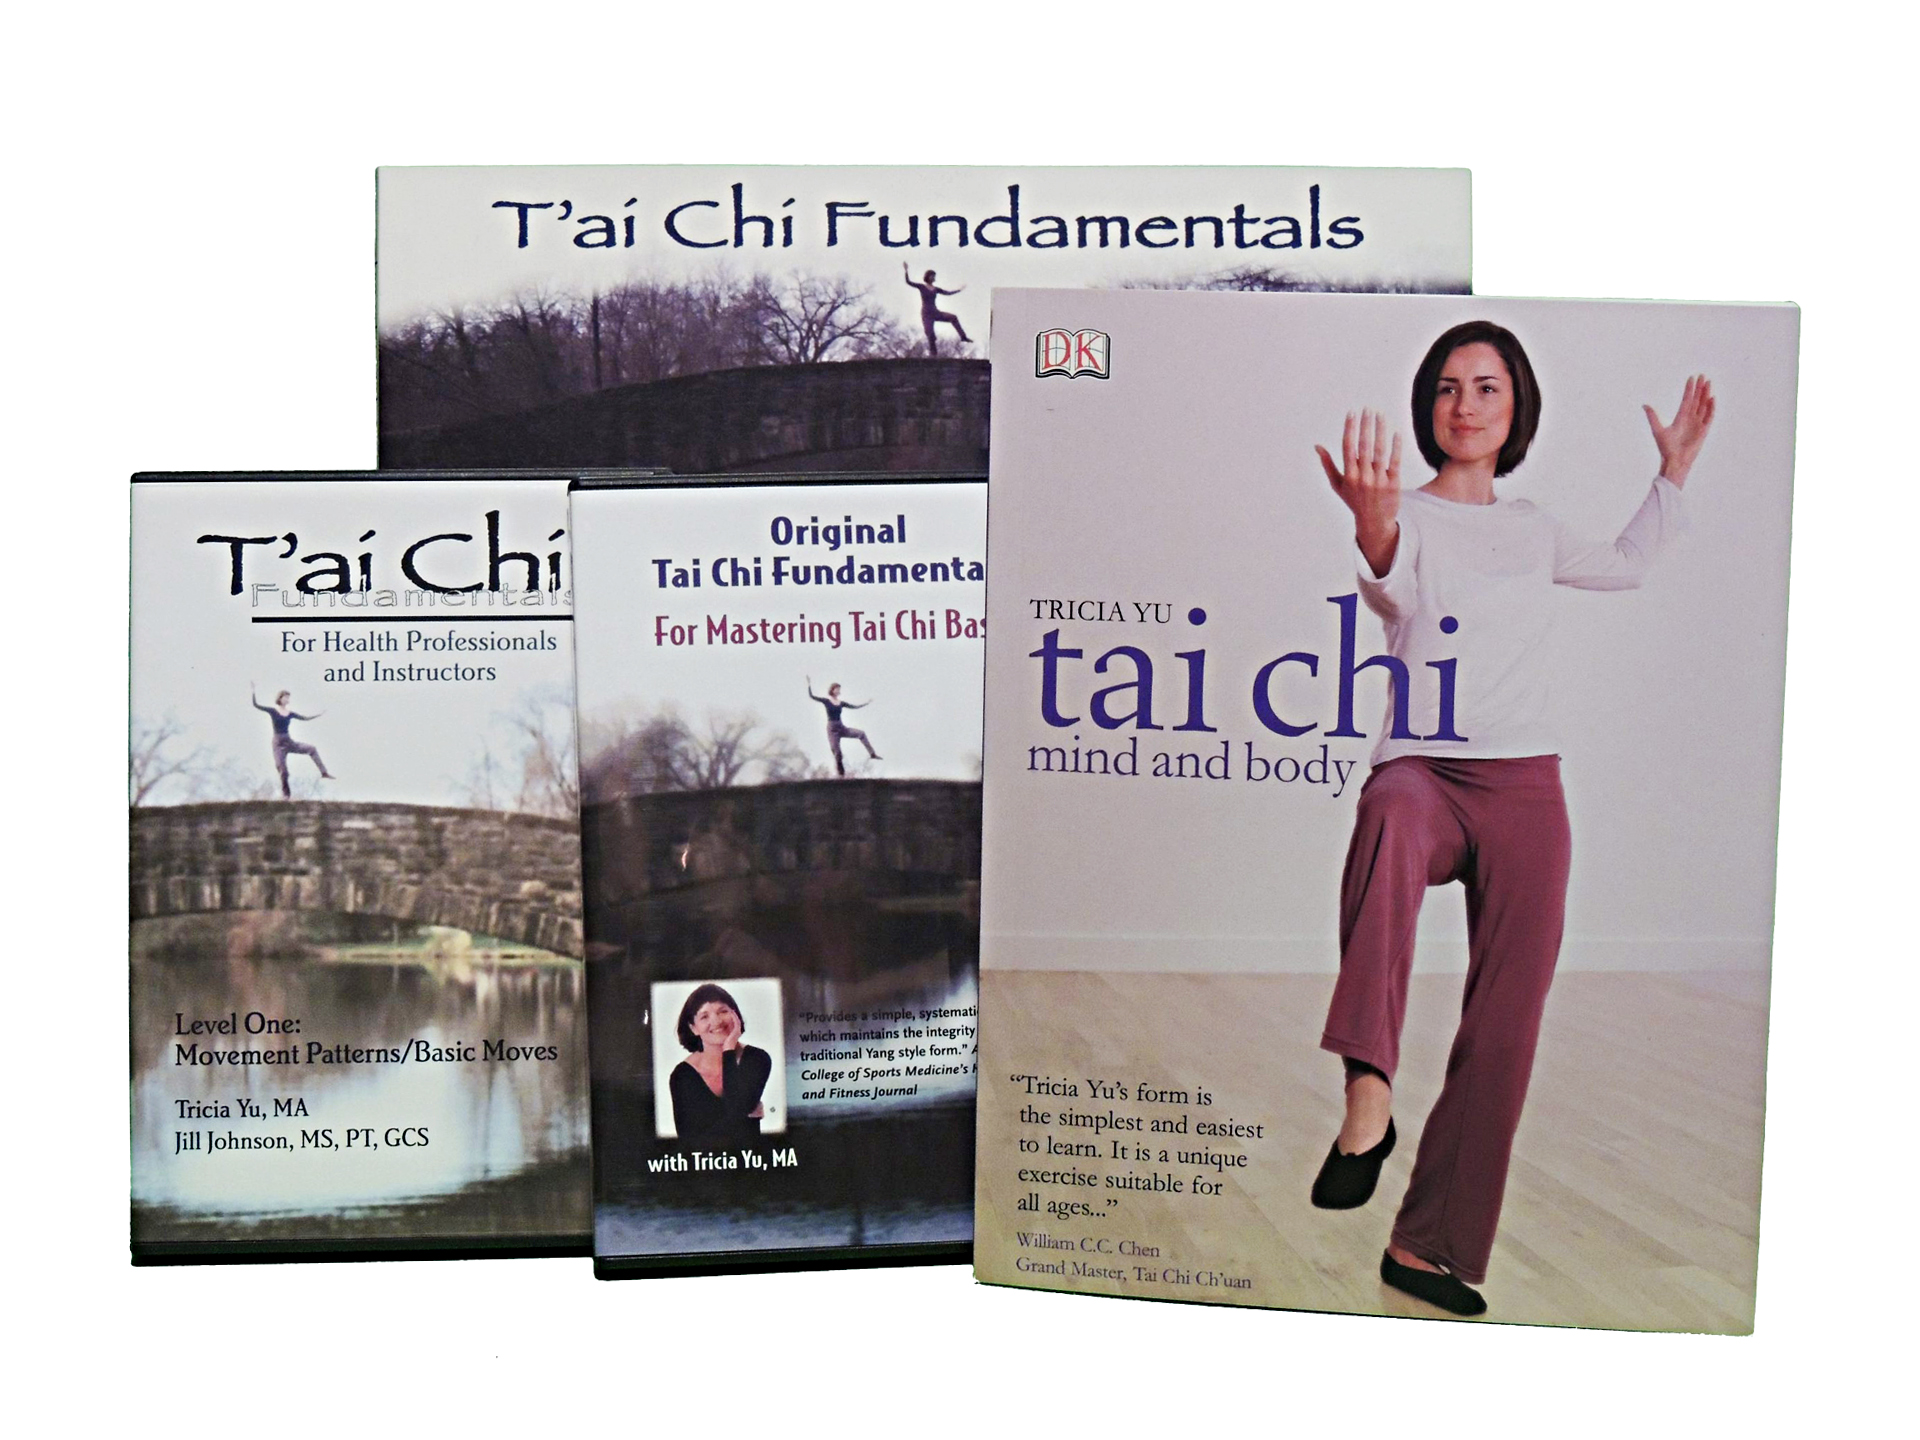 ROM Dance Professional Media Set (Book, CDs, and DVD) - Tai Chi Health